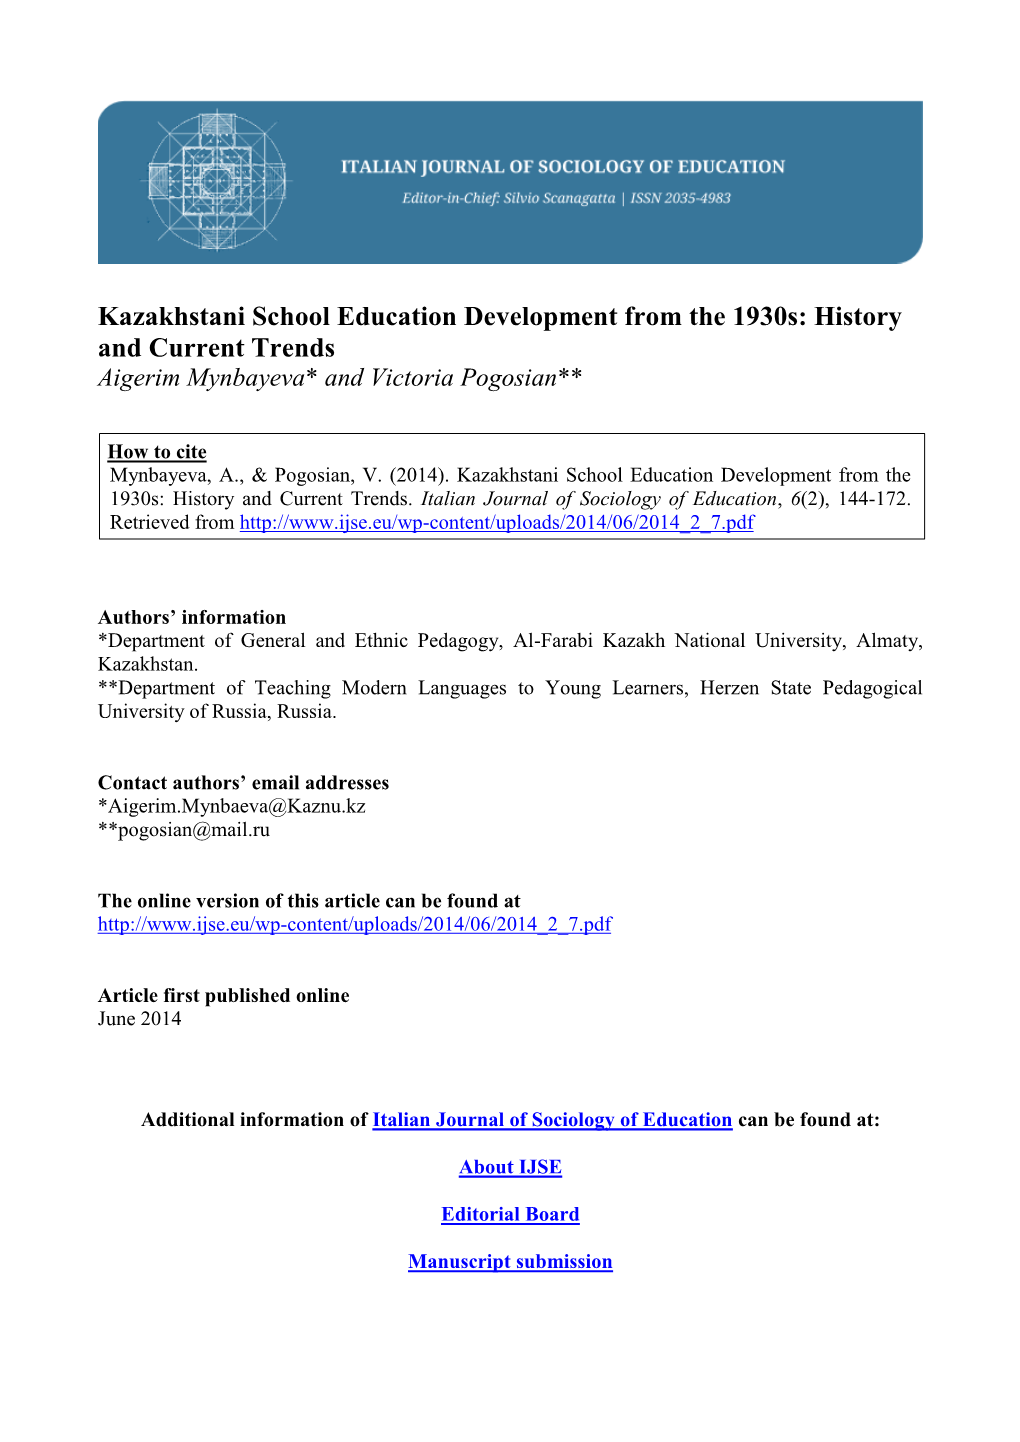 Kazakhstani School Education Development from the 1930S: History and Current Trends Aigerim Mynbayeva* and Victoria Pogosian**